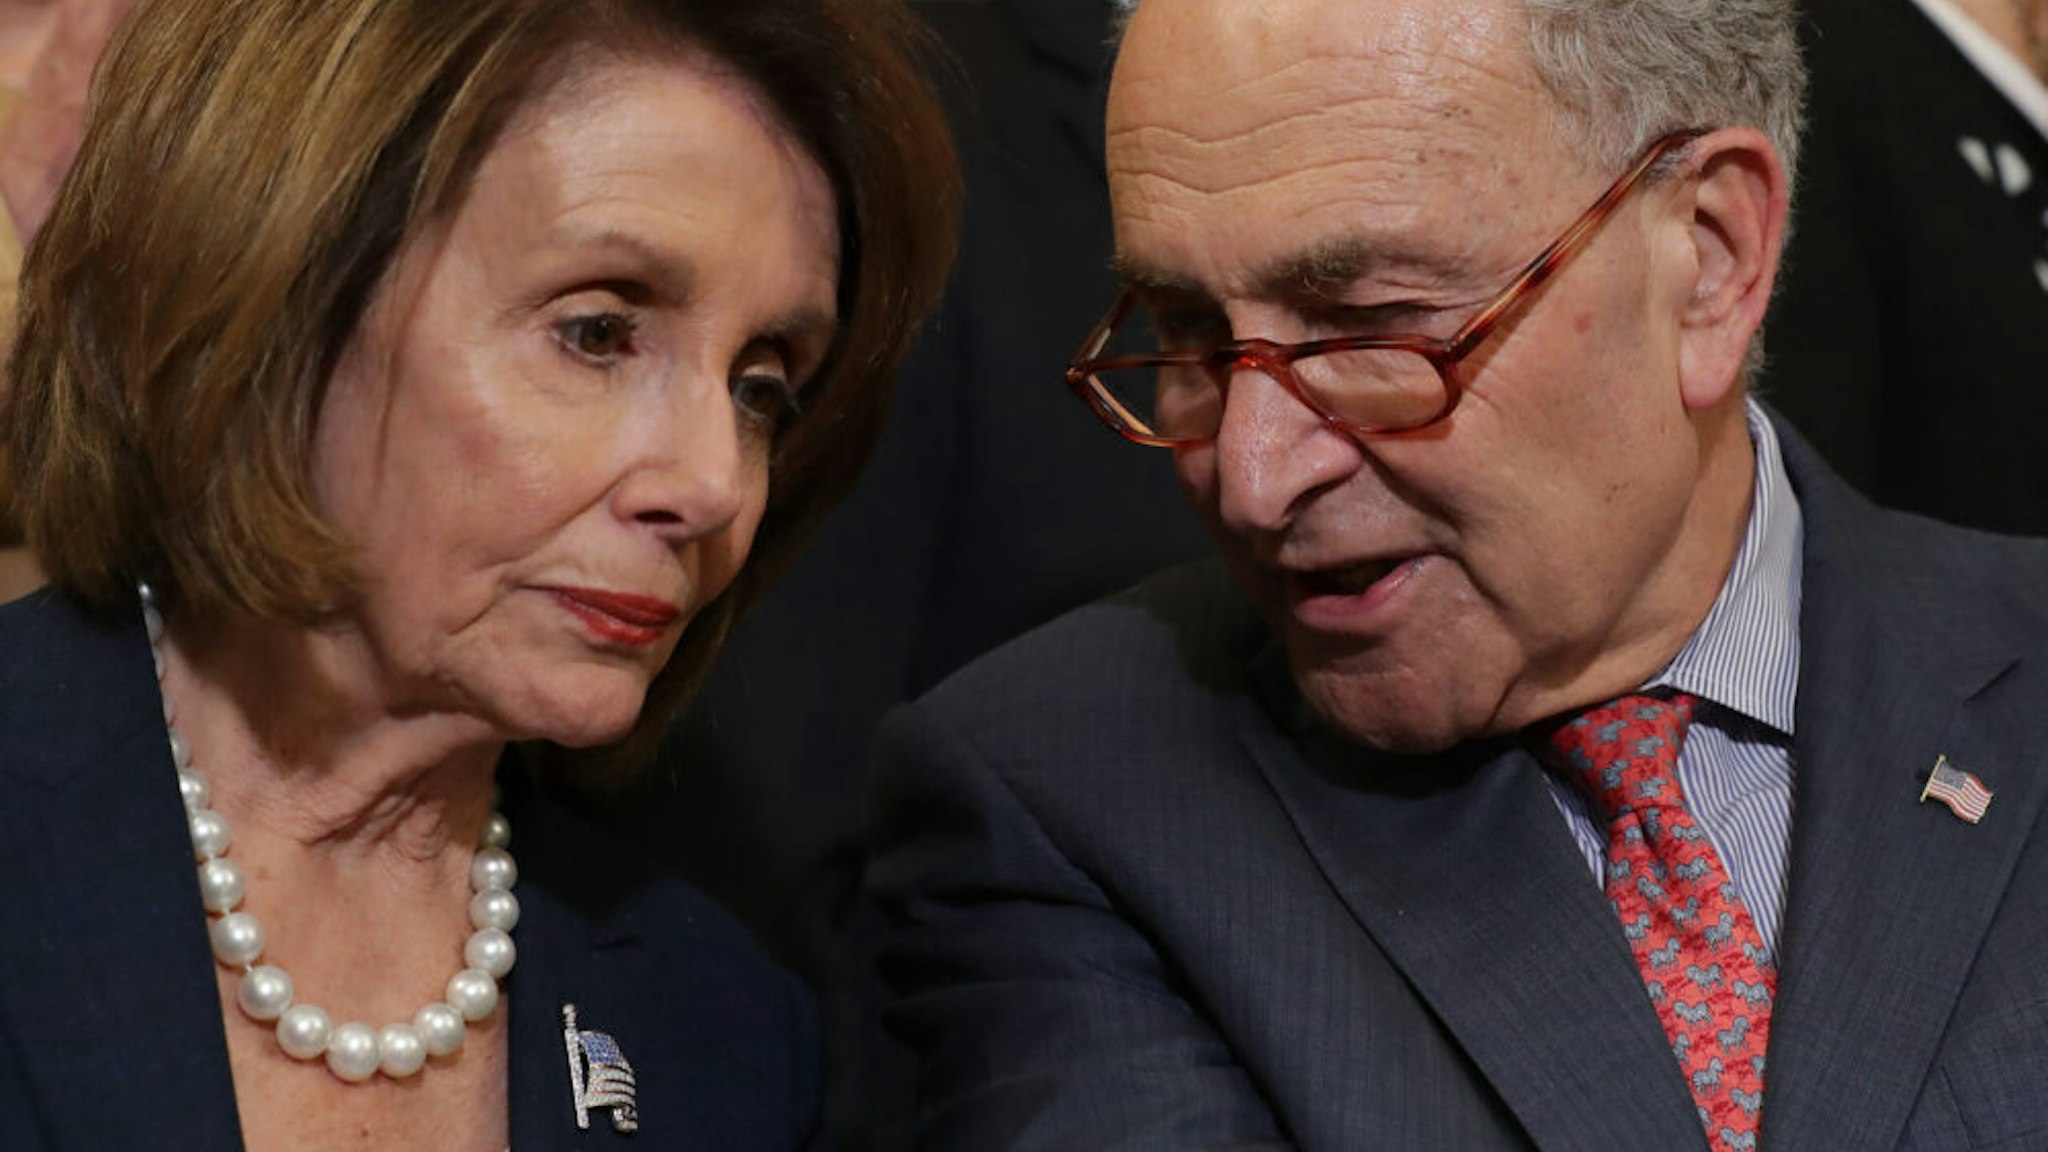 WASHINGTON, DC - MAY 15: Speaker of the House Nancy Pelosi (D-CA) (L) and Senate Minority Leader Charles Schumer (D-NY) lead a rally and news conference ahead of a House vote on health care and prescription drug legislation in the Rayburn Room at the U.S. Capitol May 15, 2019 in Washington, DC. The bicameral group of Democrats urged Senate Majority Leader Mitch McConnell (R-KY) to bring the Strengthening Health Care and Lowering Prescription Drug Costs Act up for a vote in the Senate.